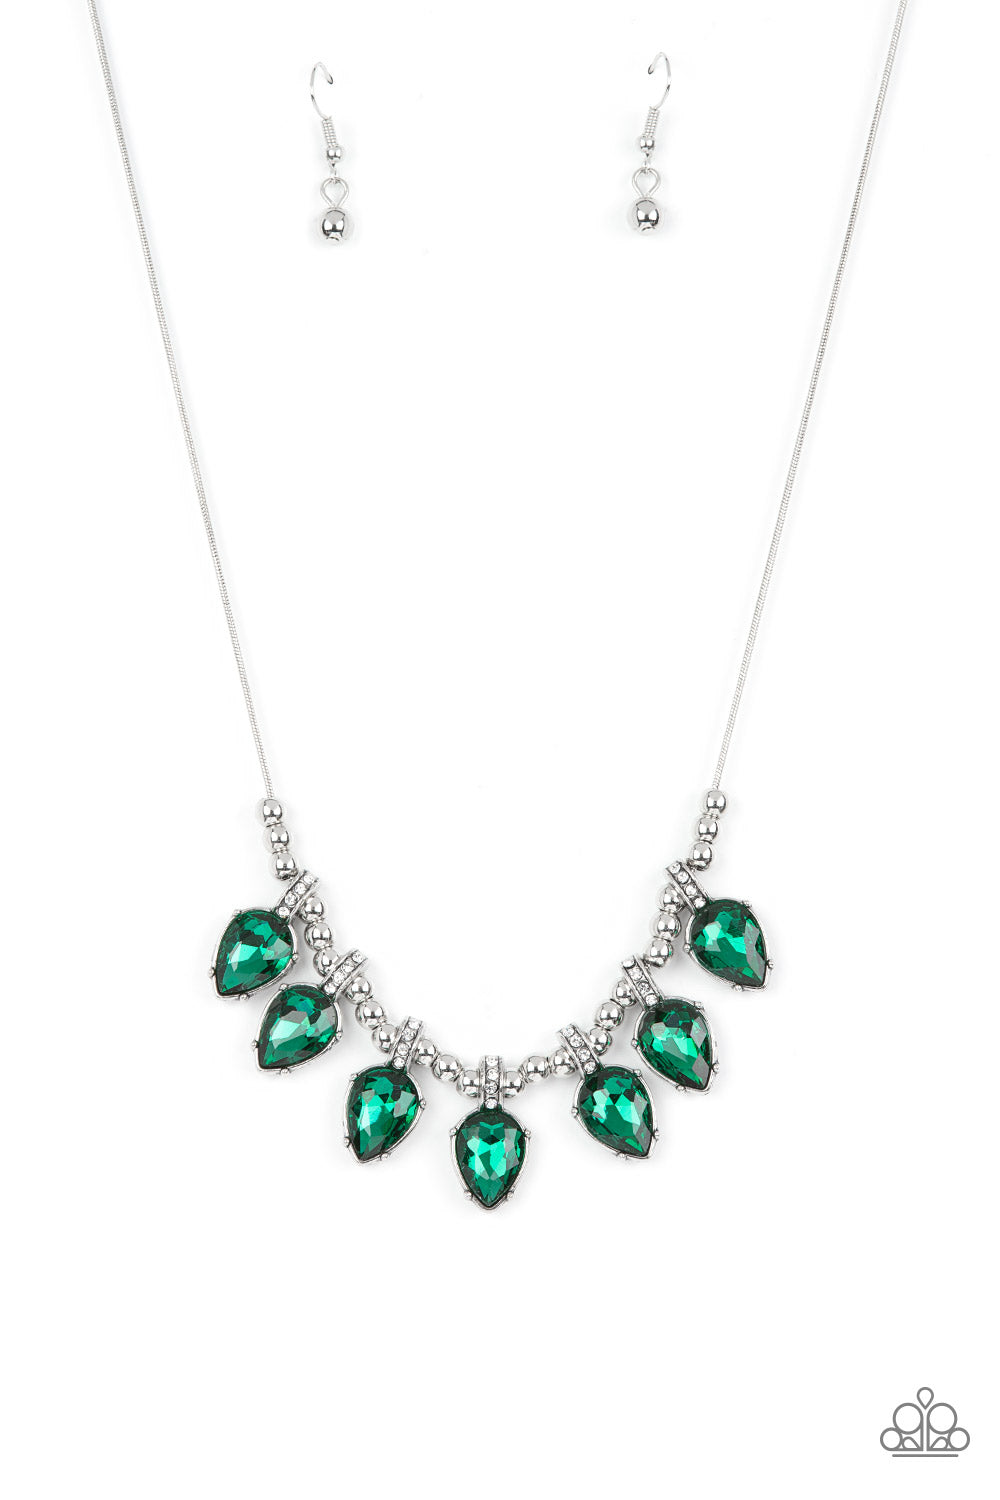 Paparazzi Necklace - Crown Jewel Couture - Green